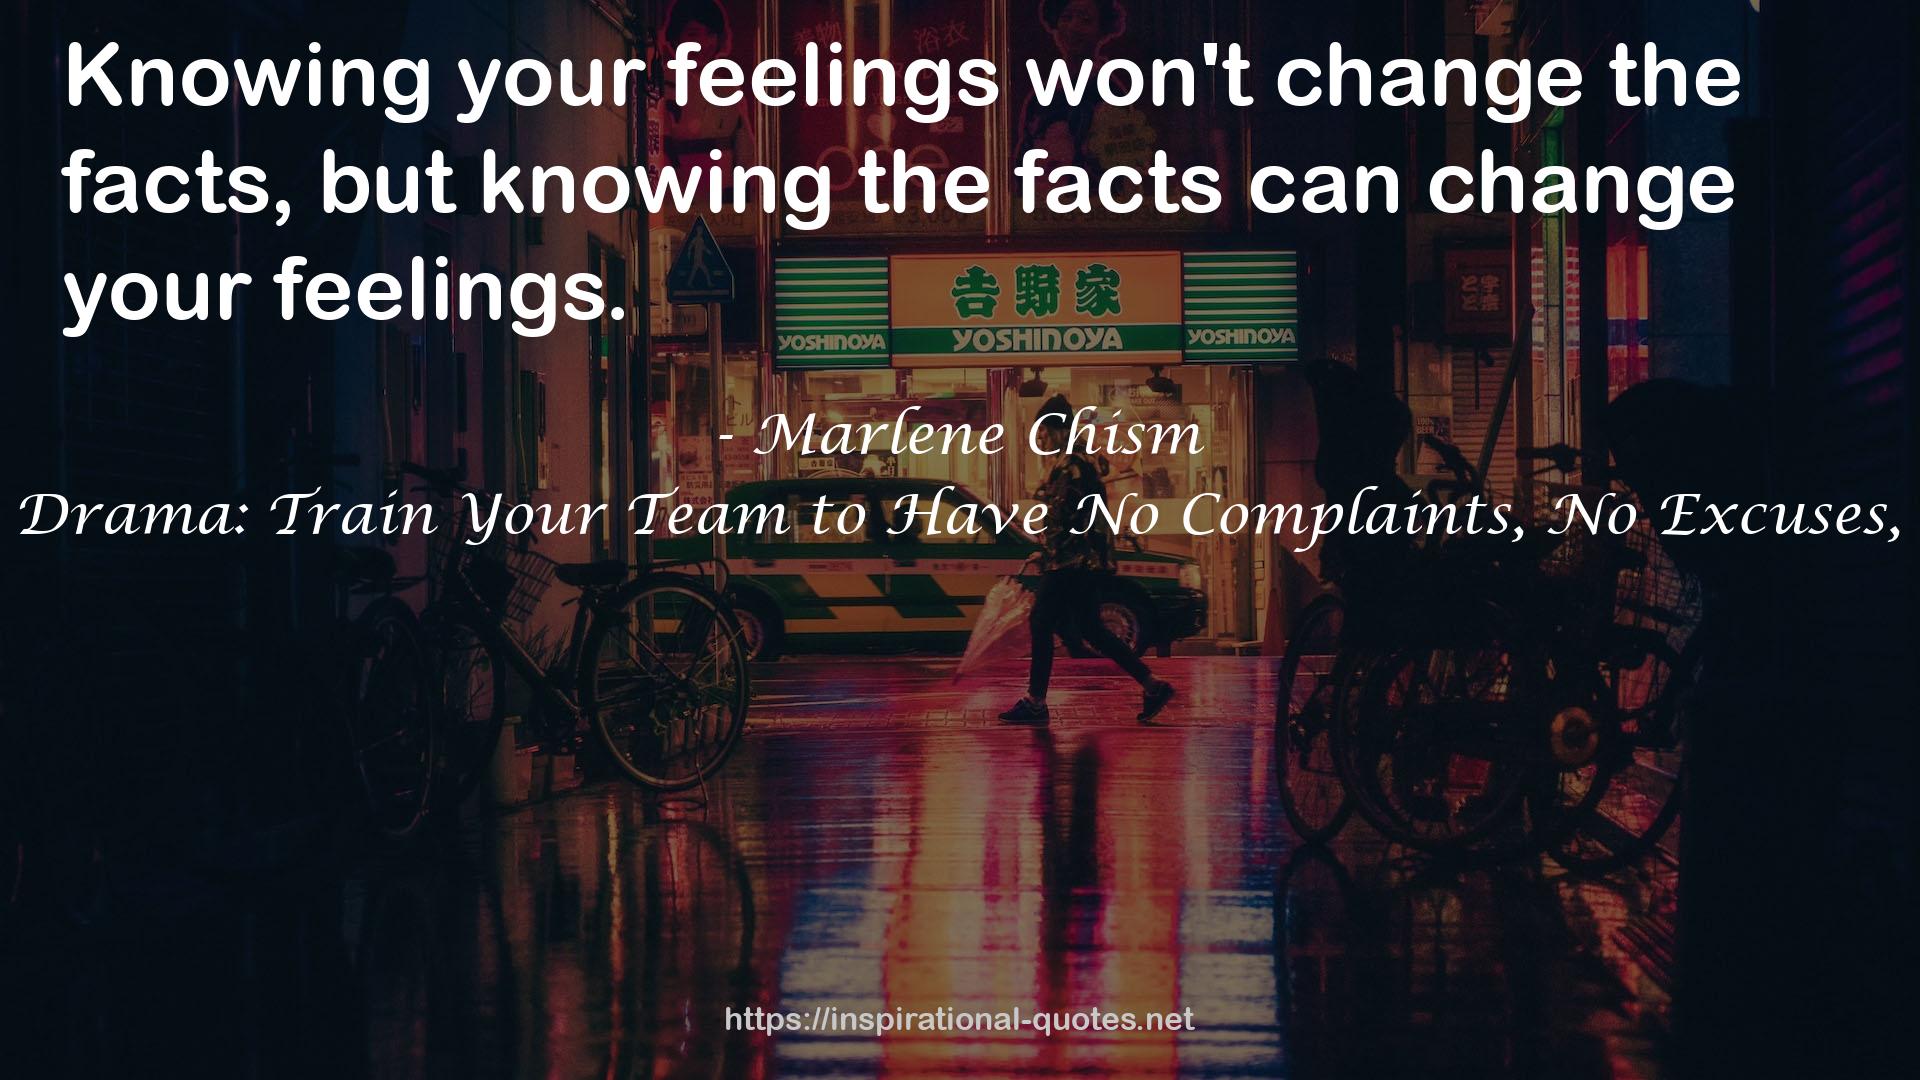 Marlene Chism QUOTES